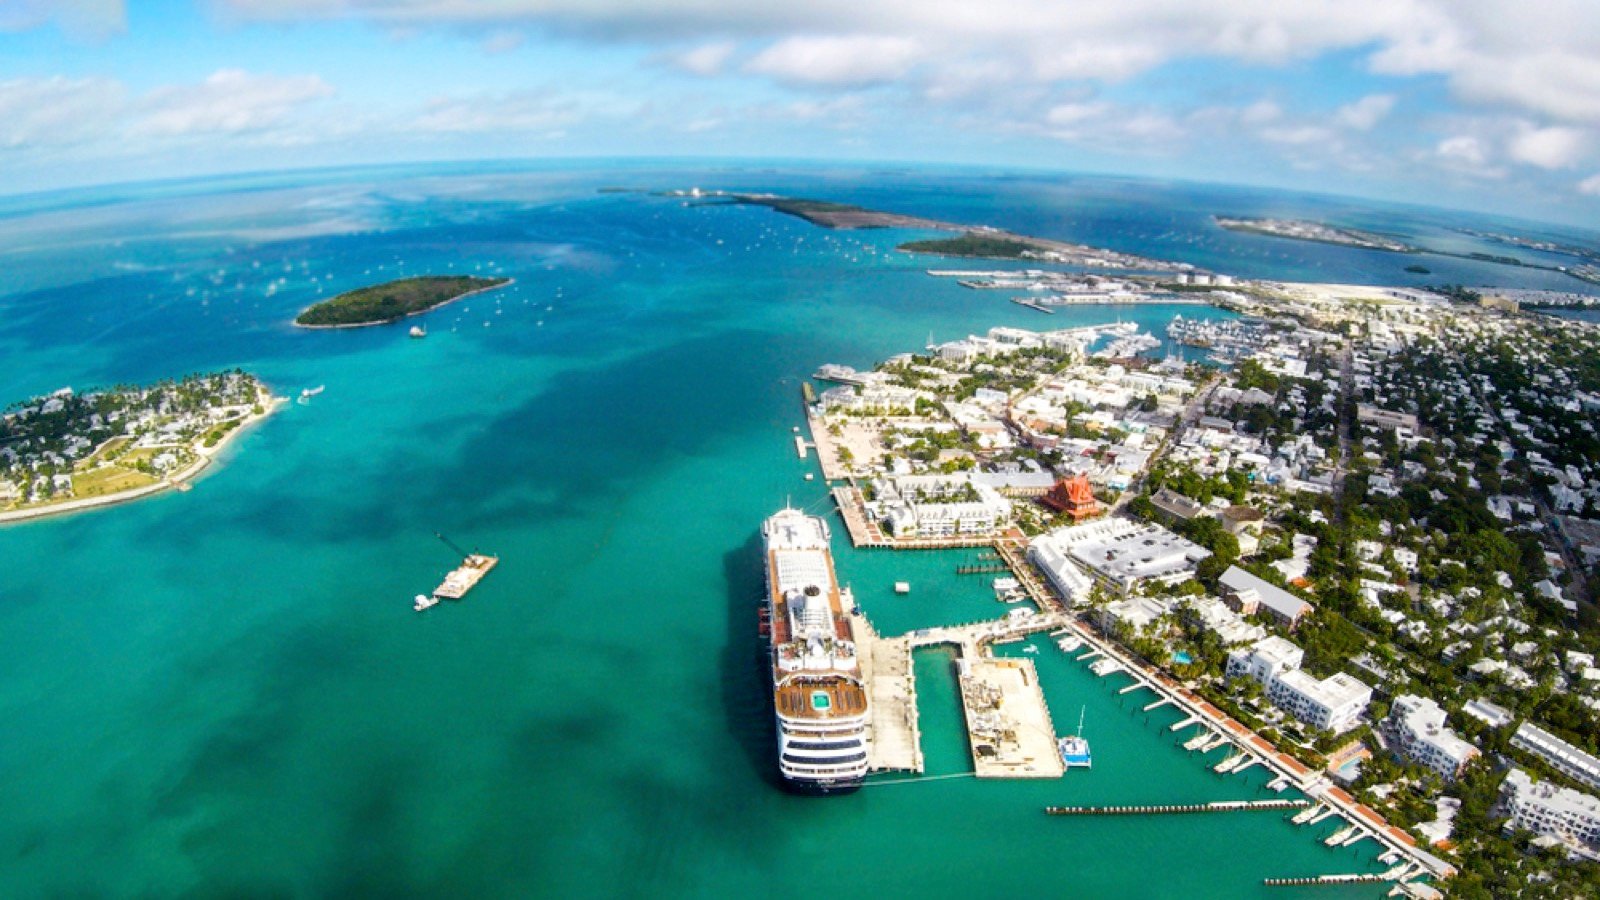 <p>Those who have spent time in the Florida Keys know that the locals’ way of life differs slightly from the rest of the country. Key West is eclectic, but that’s the charm of the island town.</p><p>Fort Zachary Taylor Historic State Park has clear turquoise water, perfect for snorkeling and turtle watching. After spending time on the beach, check out Mallory Square’s shops, bars, and street performers for a unique, unforgettable Florida Keys experience.</p>